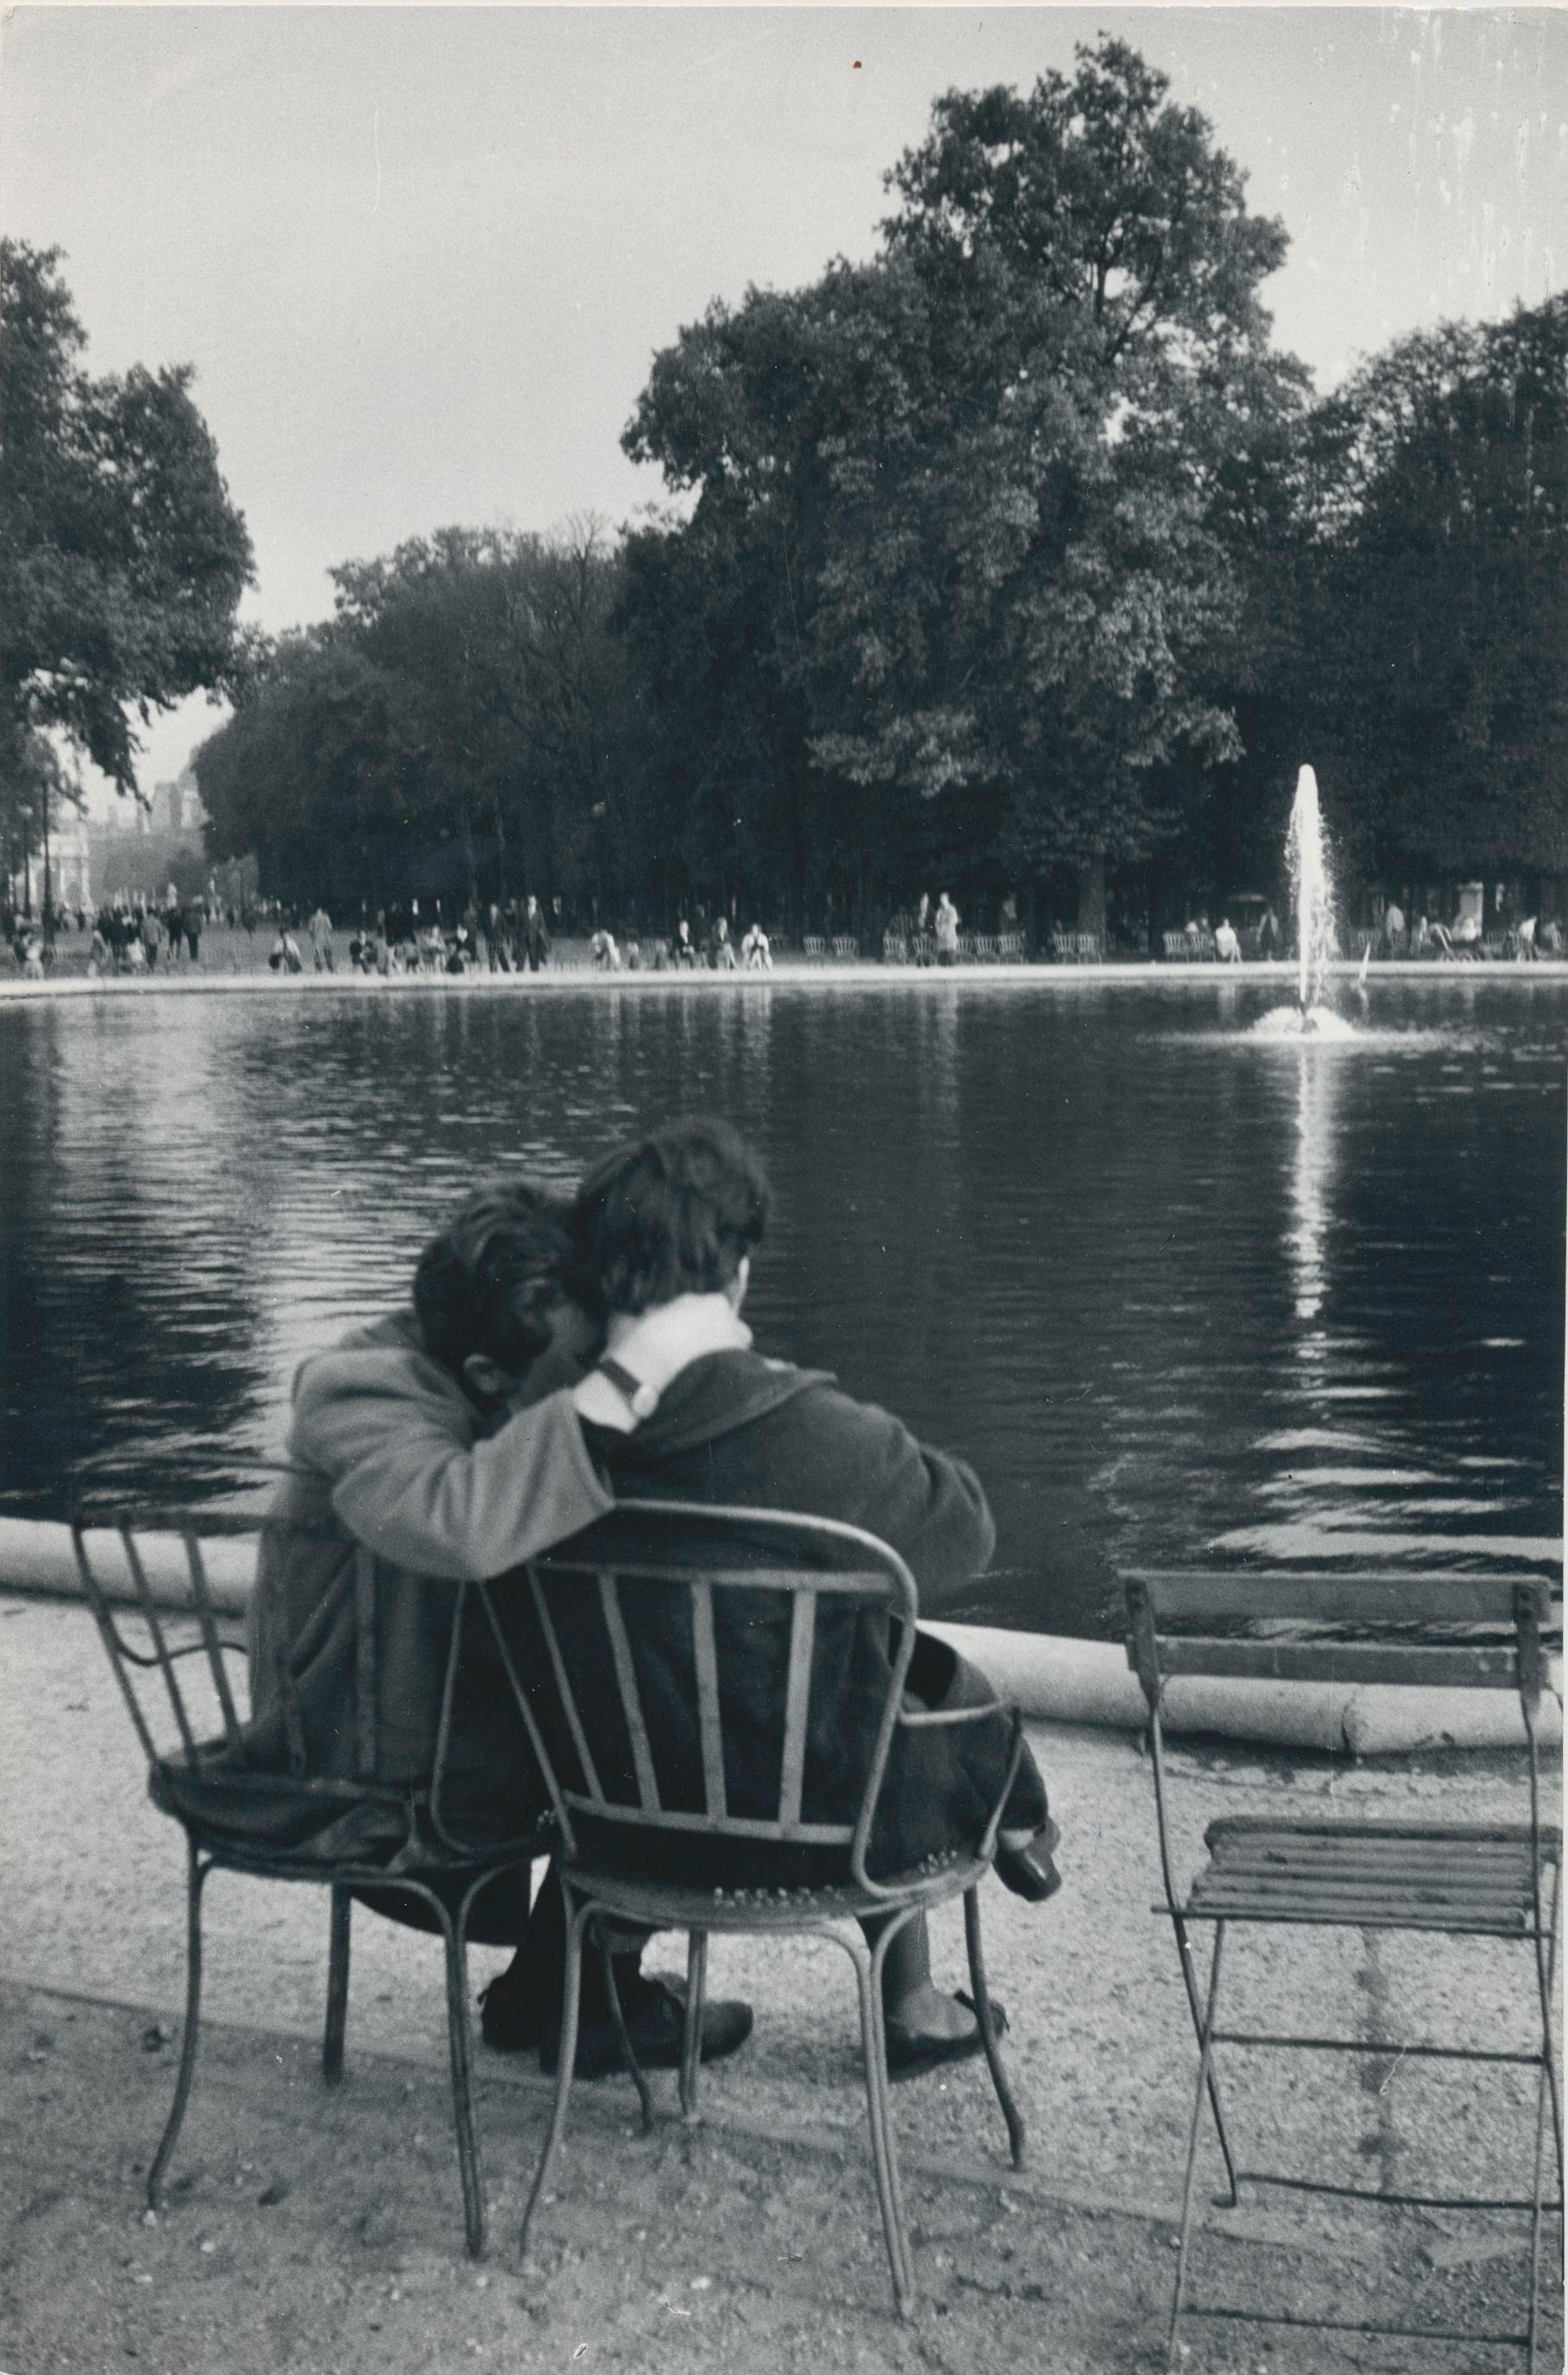 Erich Andres Black and White Photograph - Couple, Lover, Street Photography, Black and White, Paris, 1950s, 23, 2 x 15, 3 cm